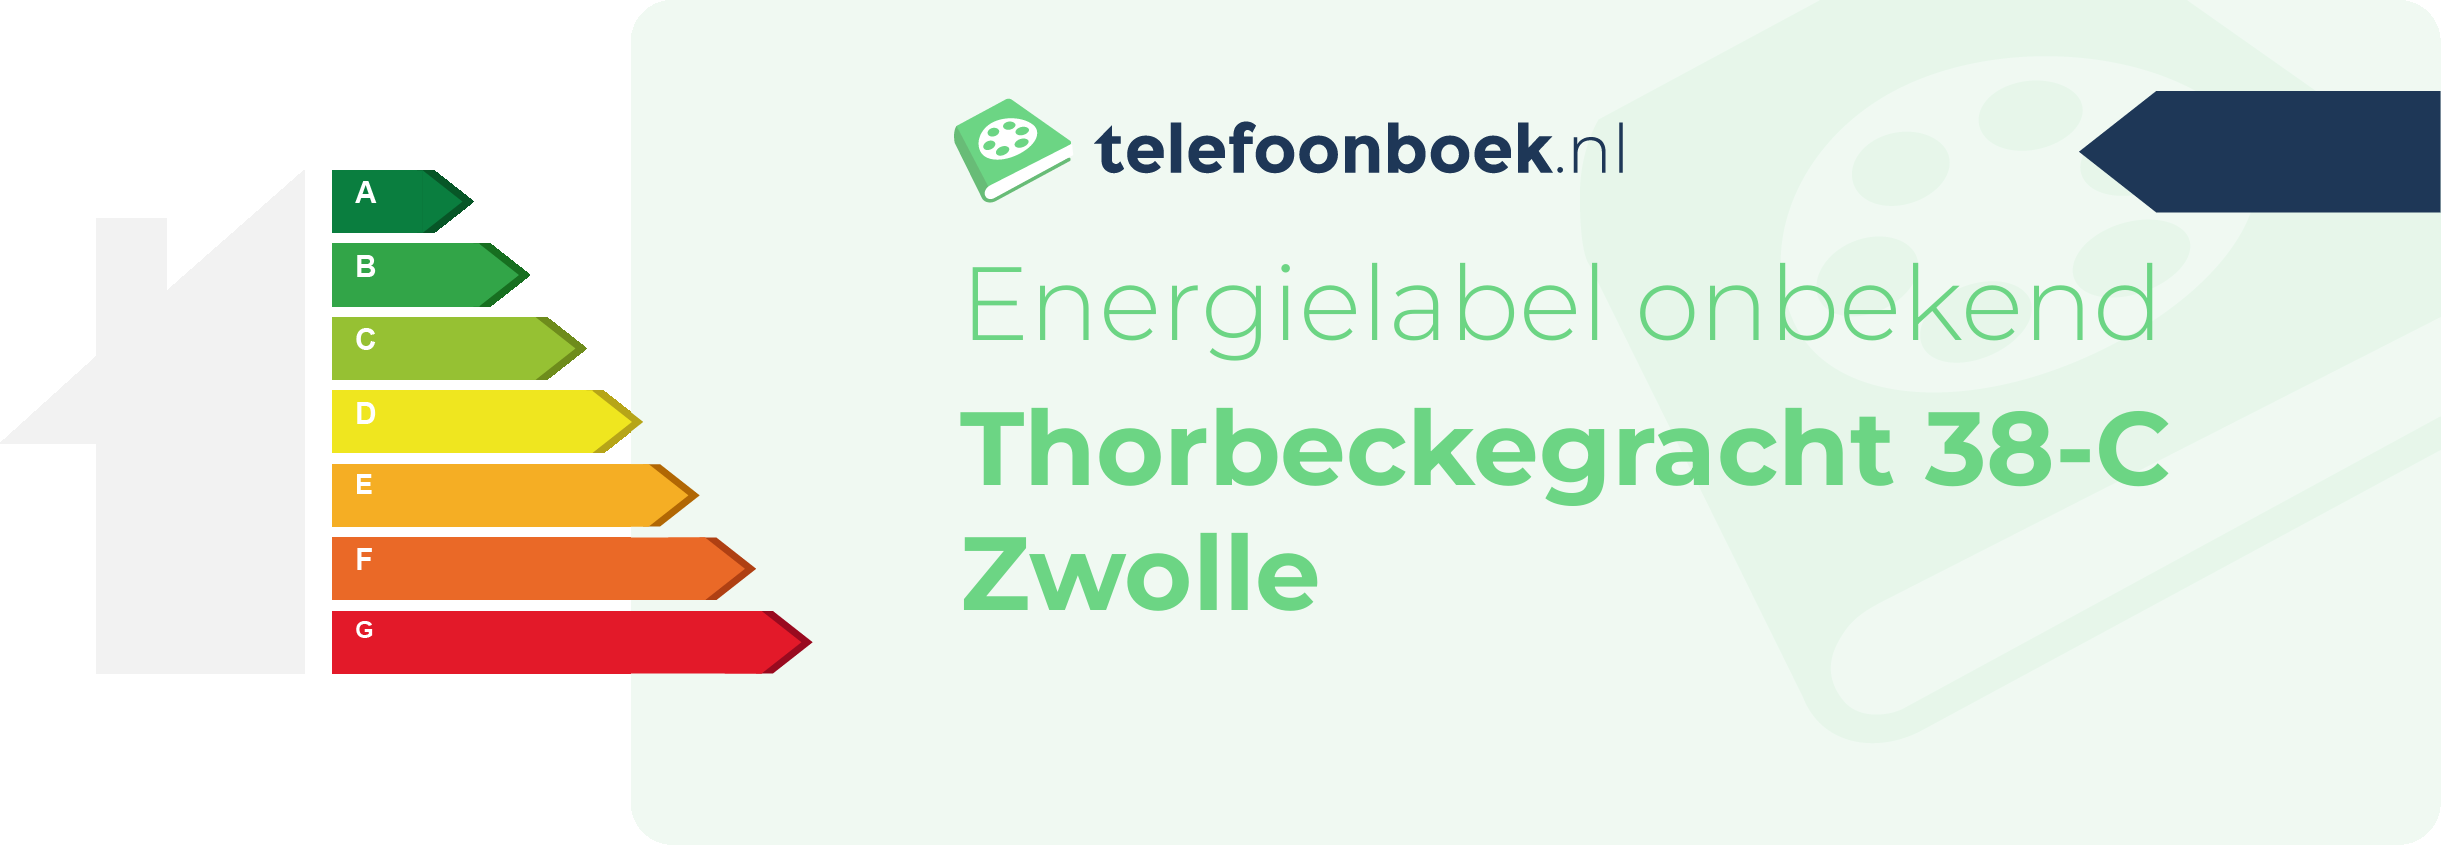 Energielabel Thorbeckegracht 38-C Zwolle